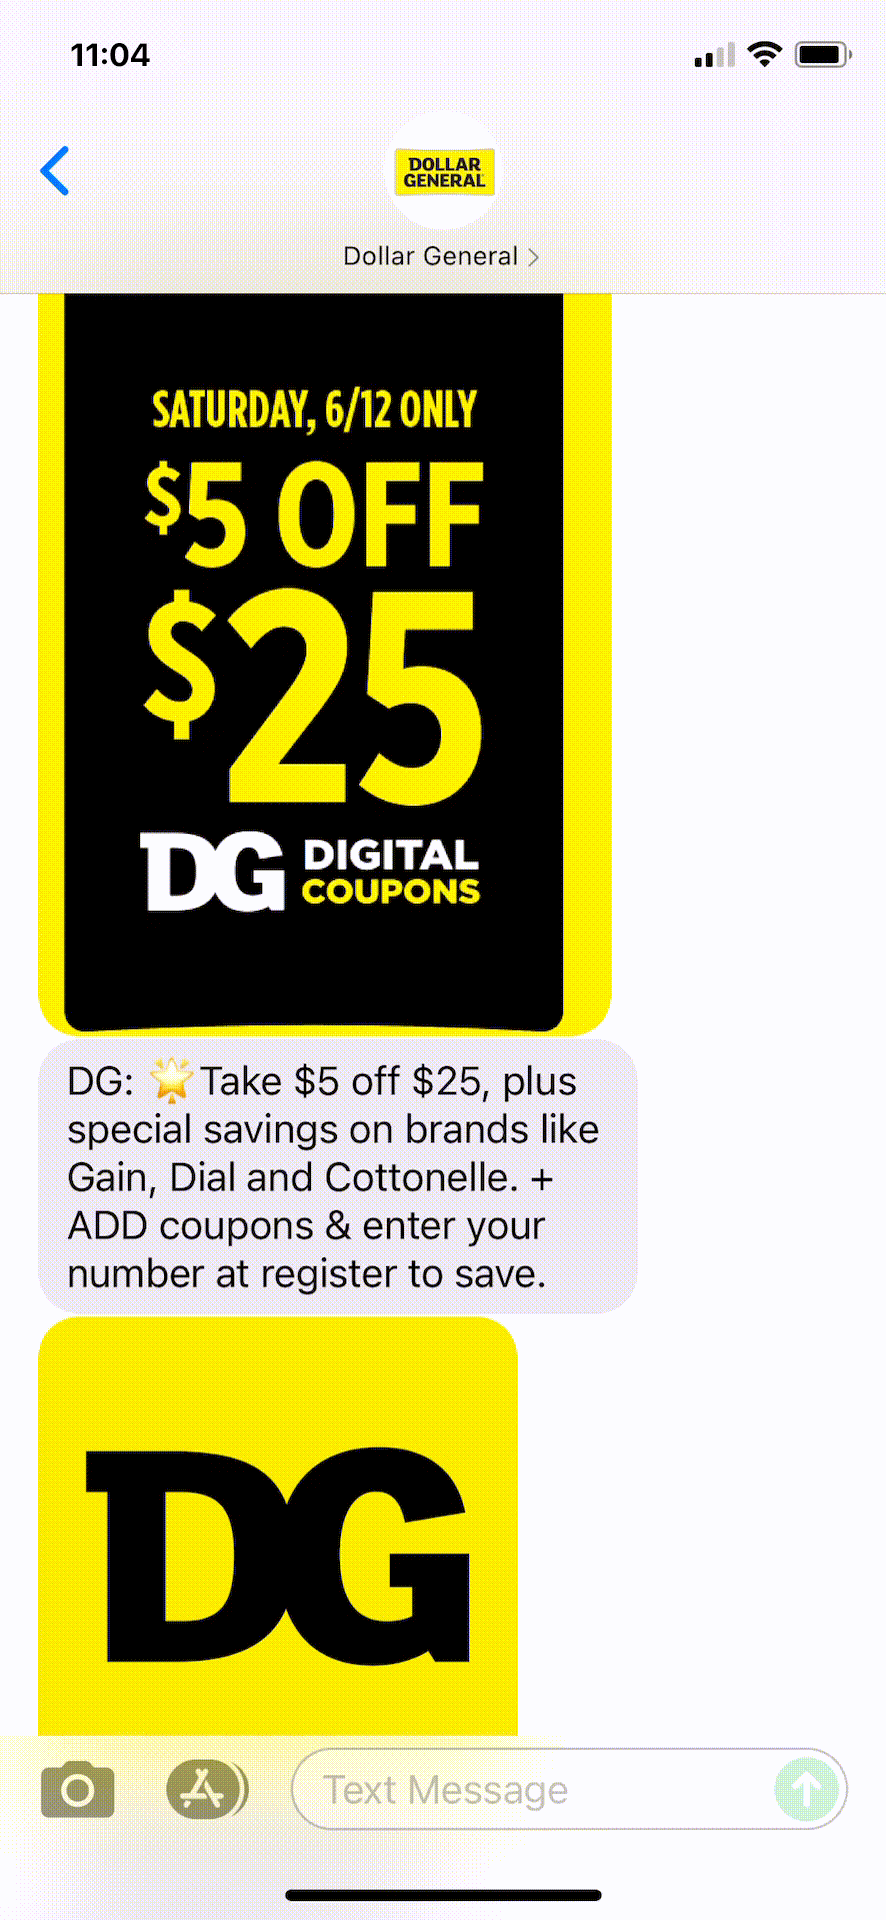 Dollar-General-Text-Message-Marketing-Example-06.10.2021